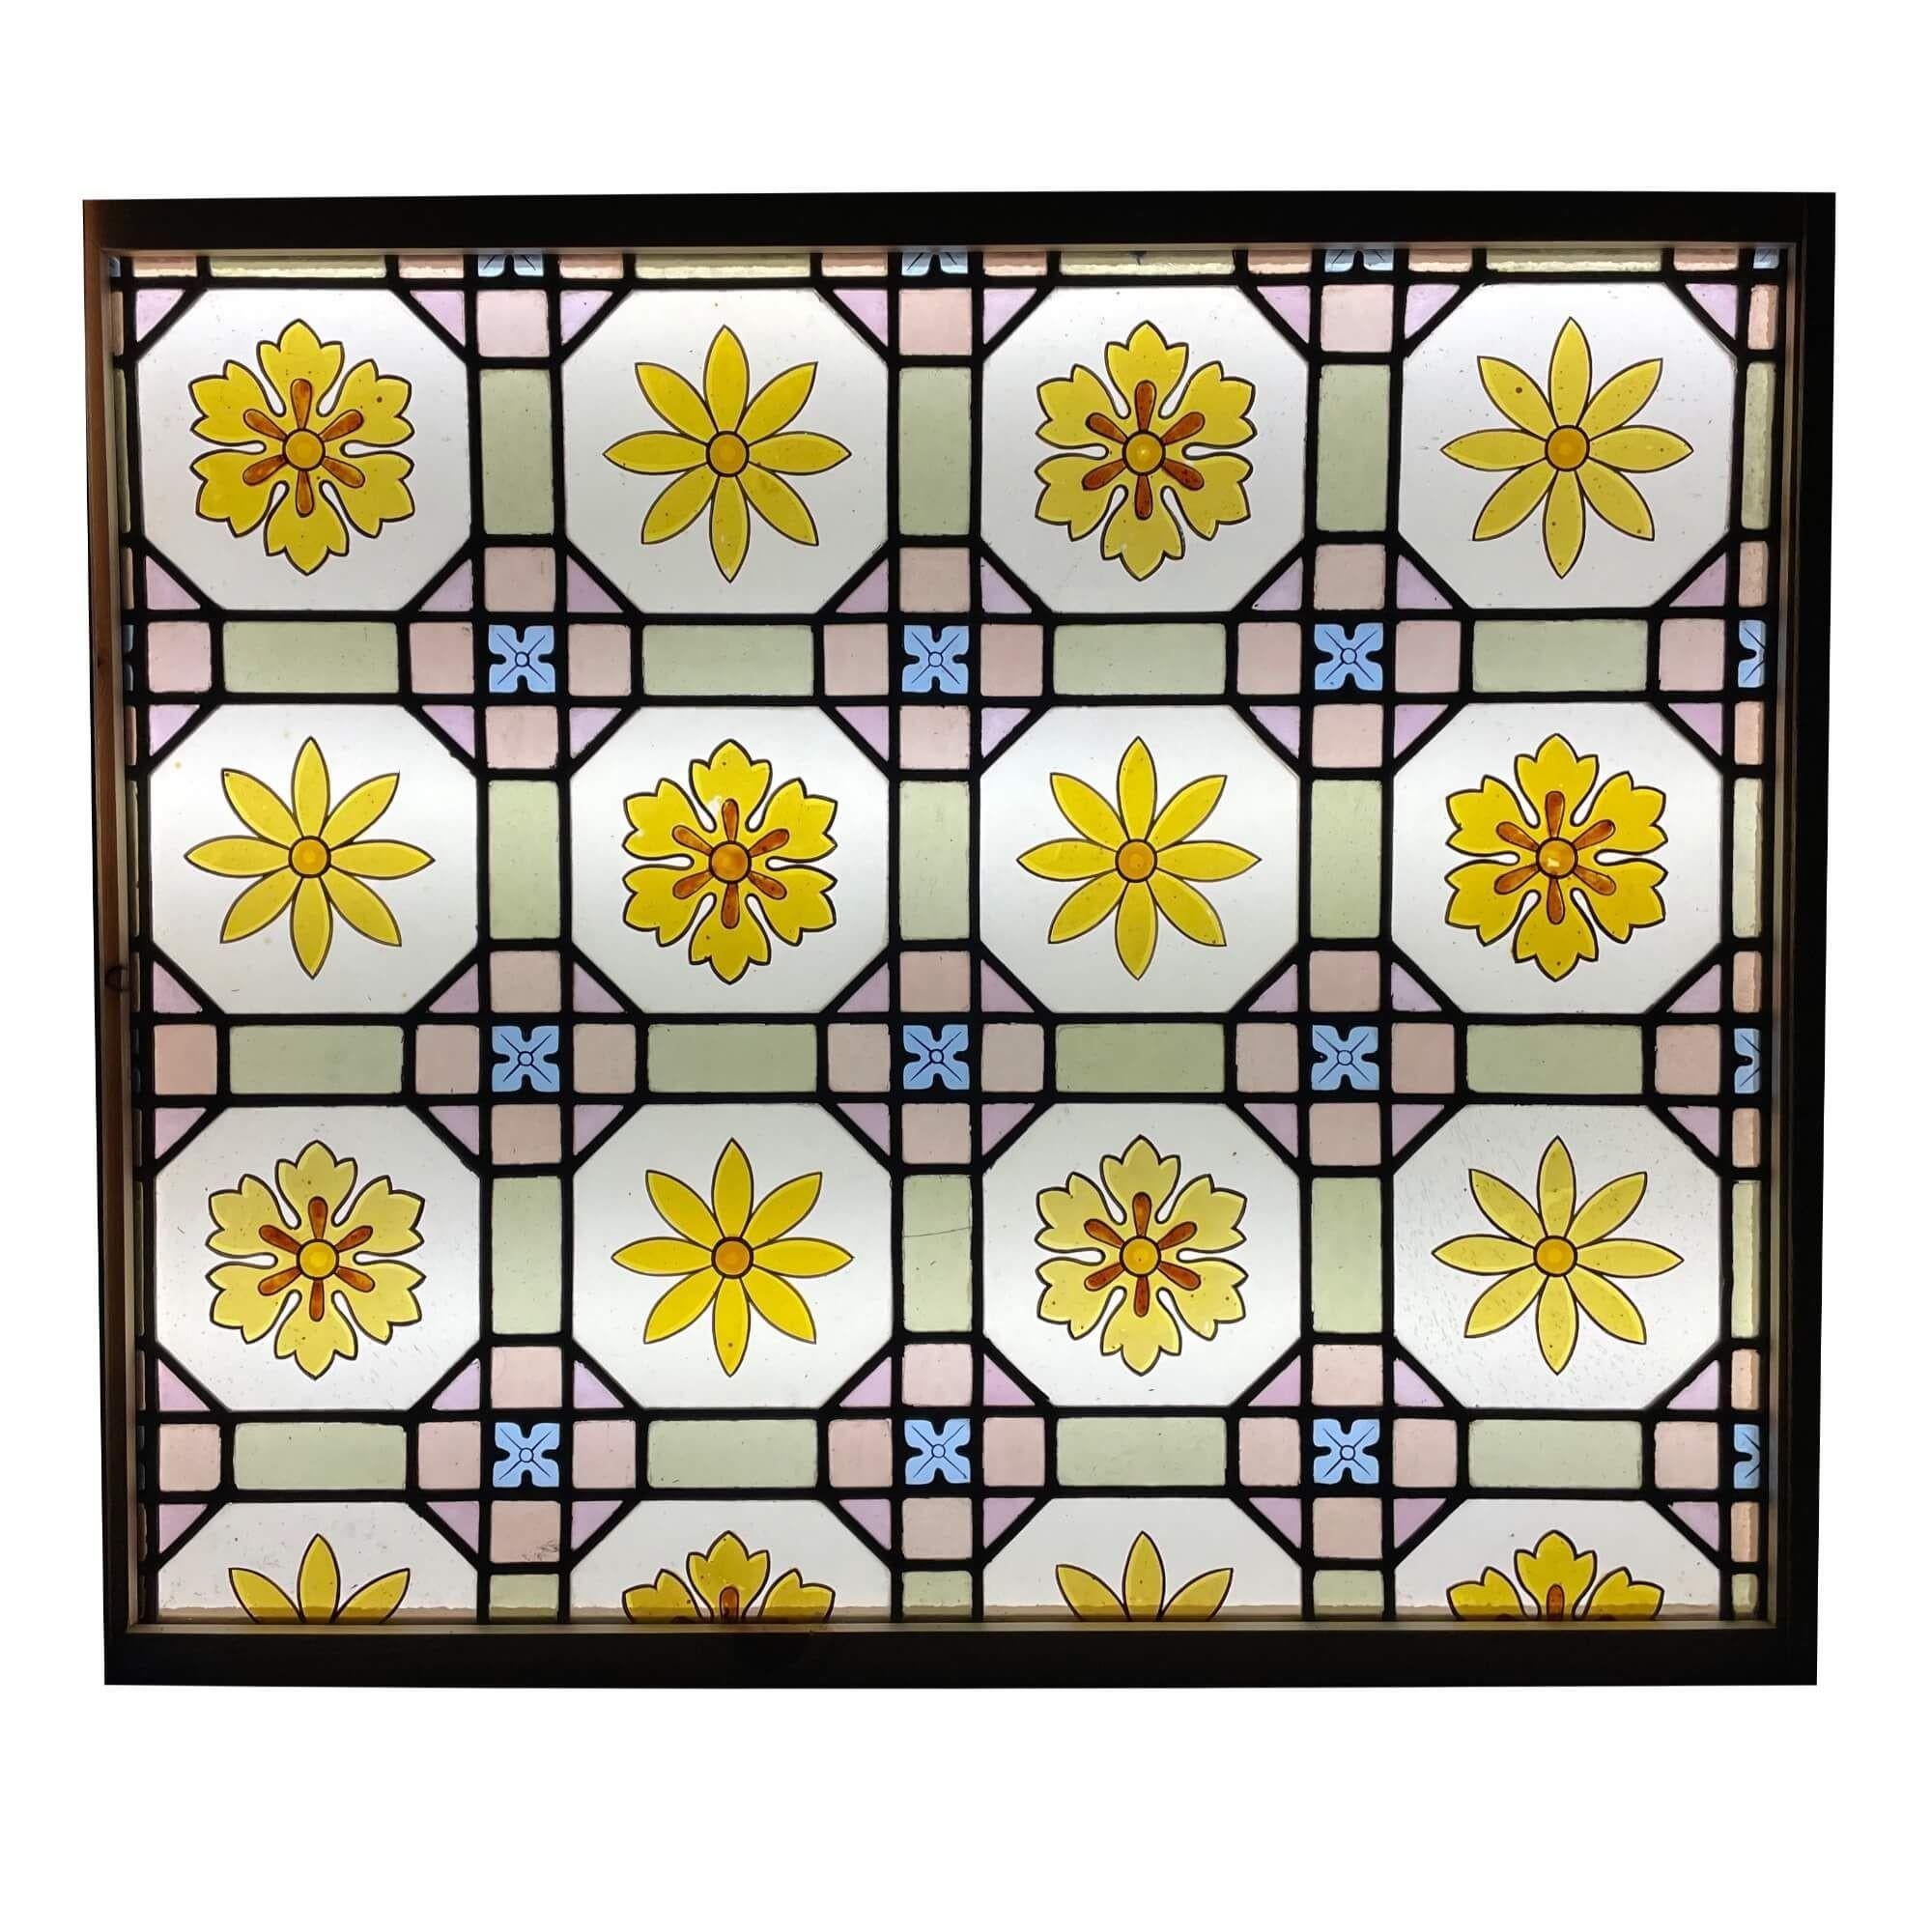 An antique late Victorian floral patterned stained glass window, dating to circa 1890. A simply beautiful window, this late 19th century stained glass showcases a display of vibrant daisy-like flowers, accompanied by small blue flowers, across a